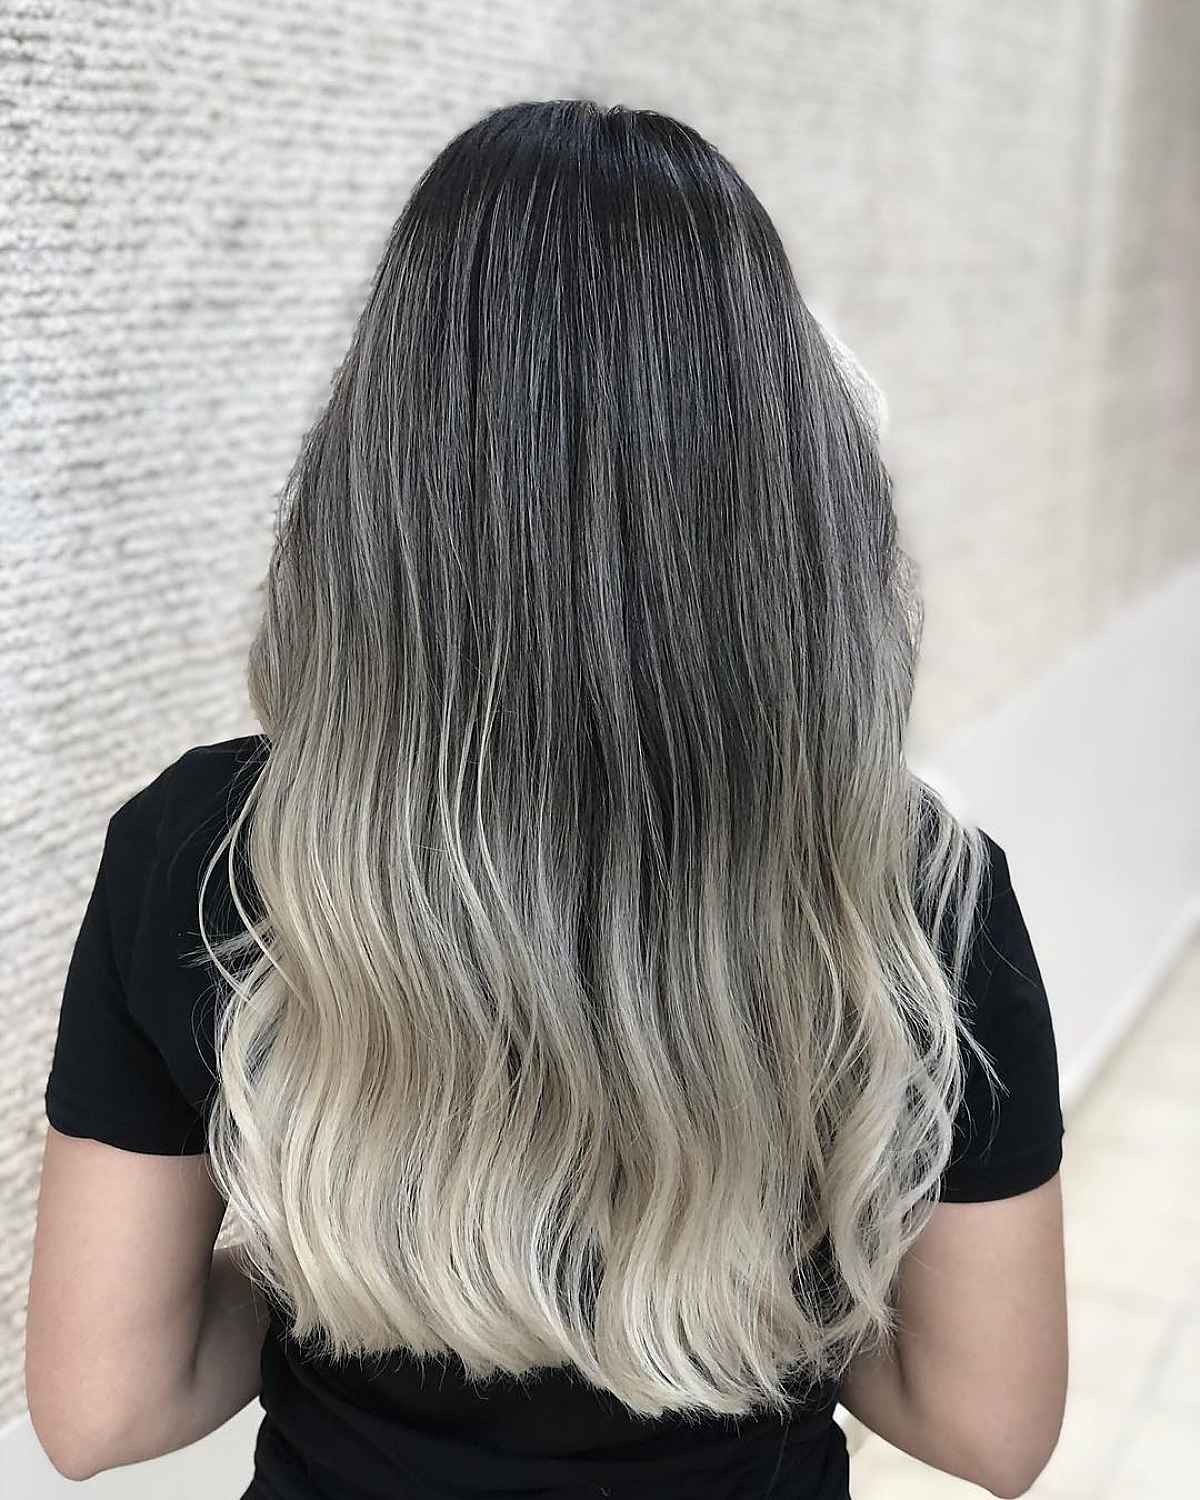 Cool-toned blonde ombre on dark hair